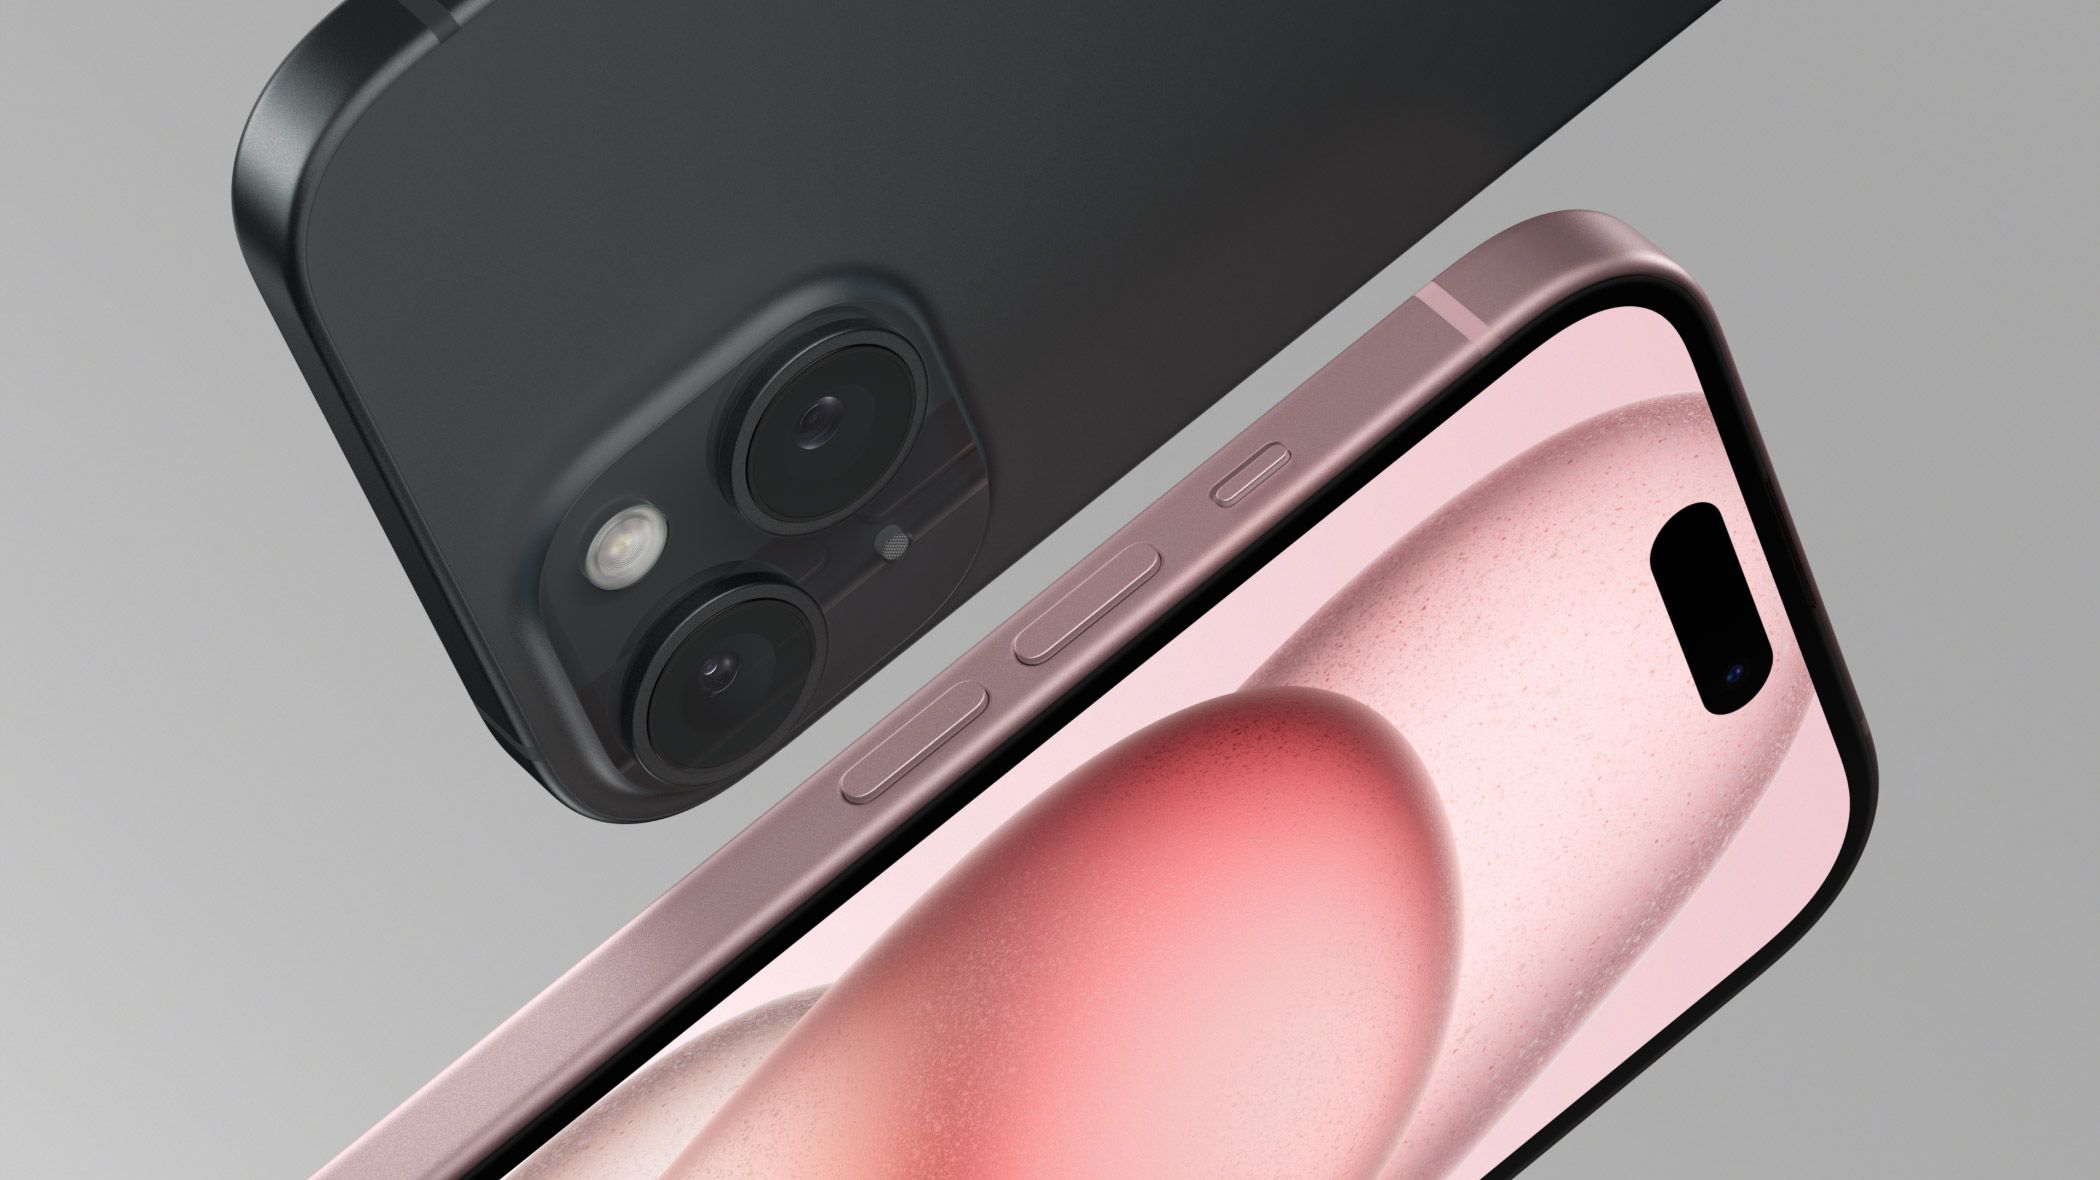 iPhone 15 in pink and black color over a gray background